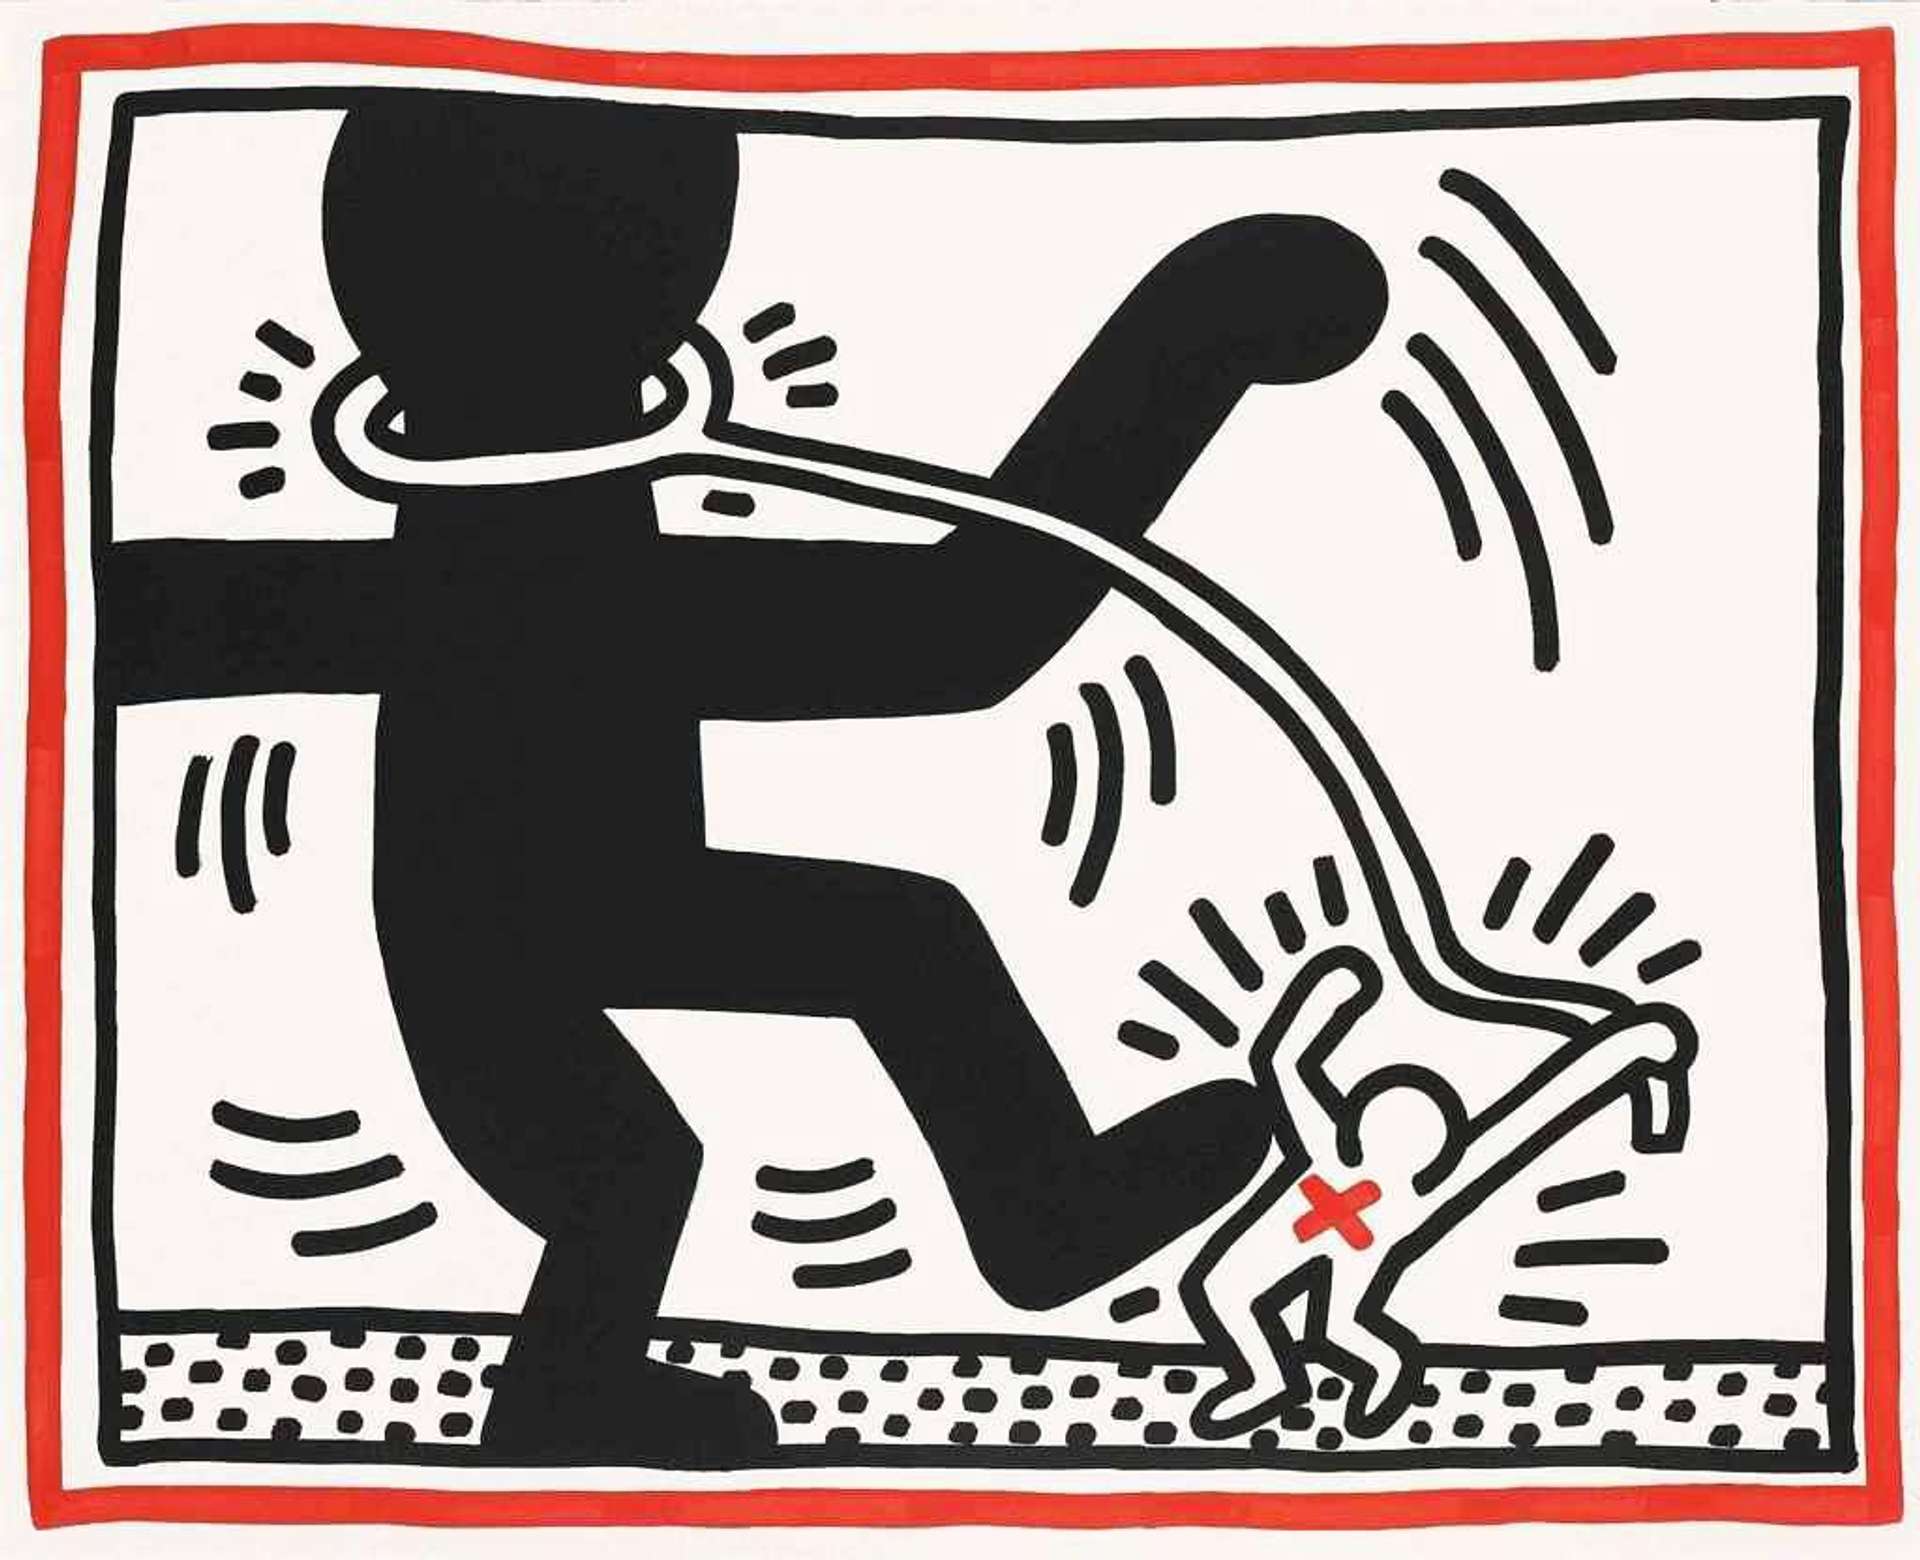 A black figure raising its foot, stepping on the outline of a white figure in the style of Pop Art